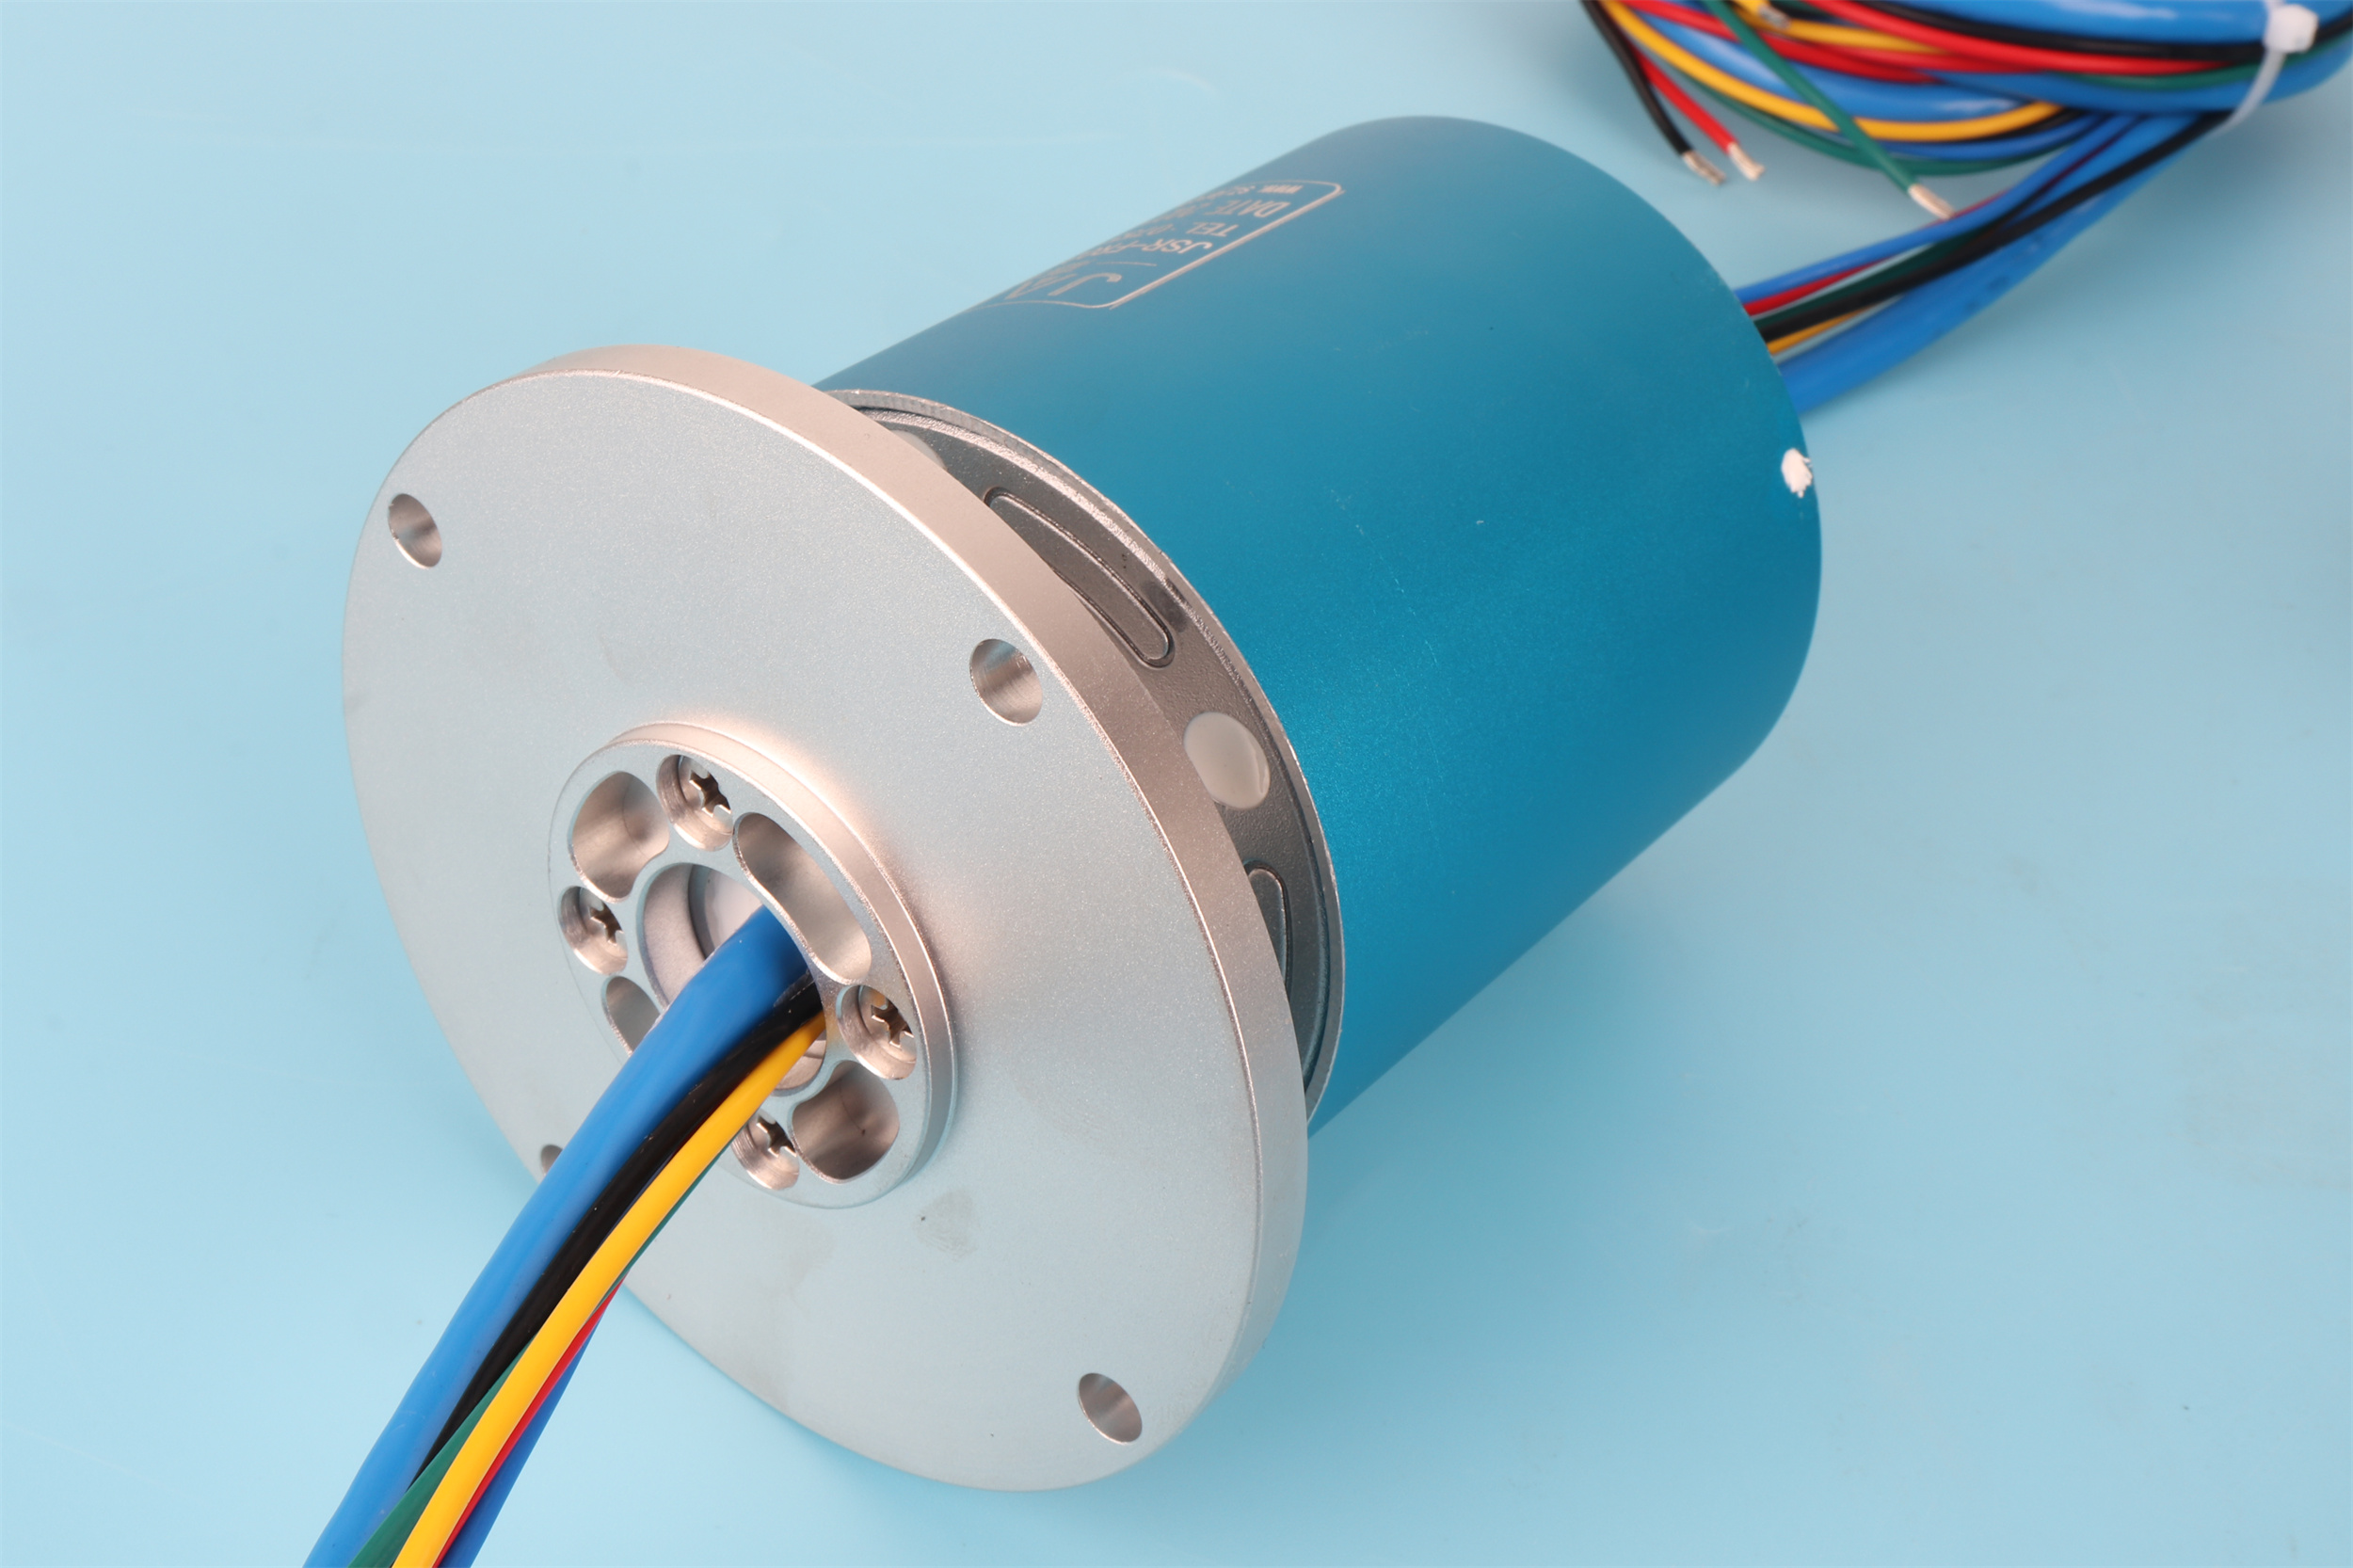 What are the functions for slip rings?